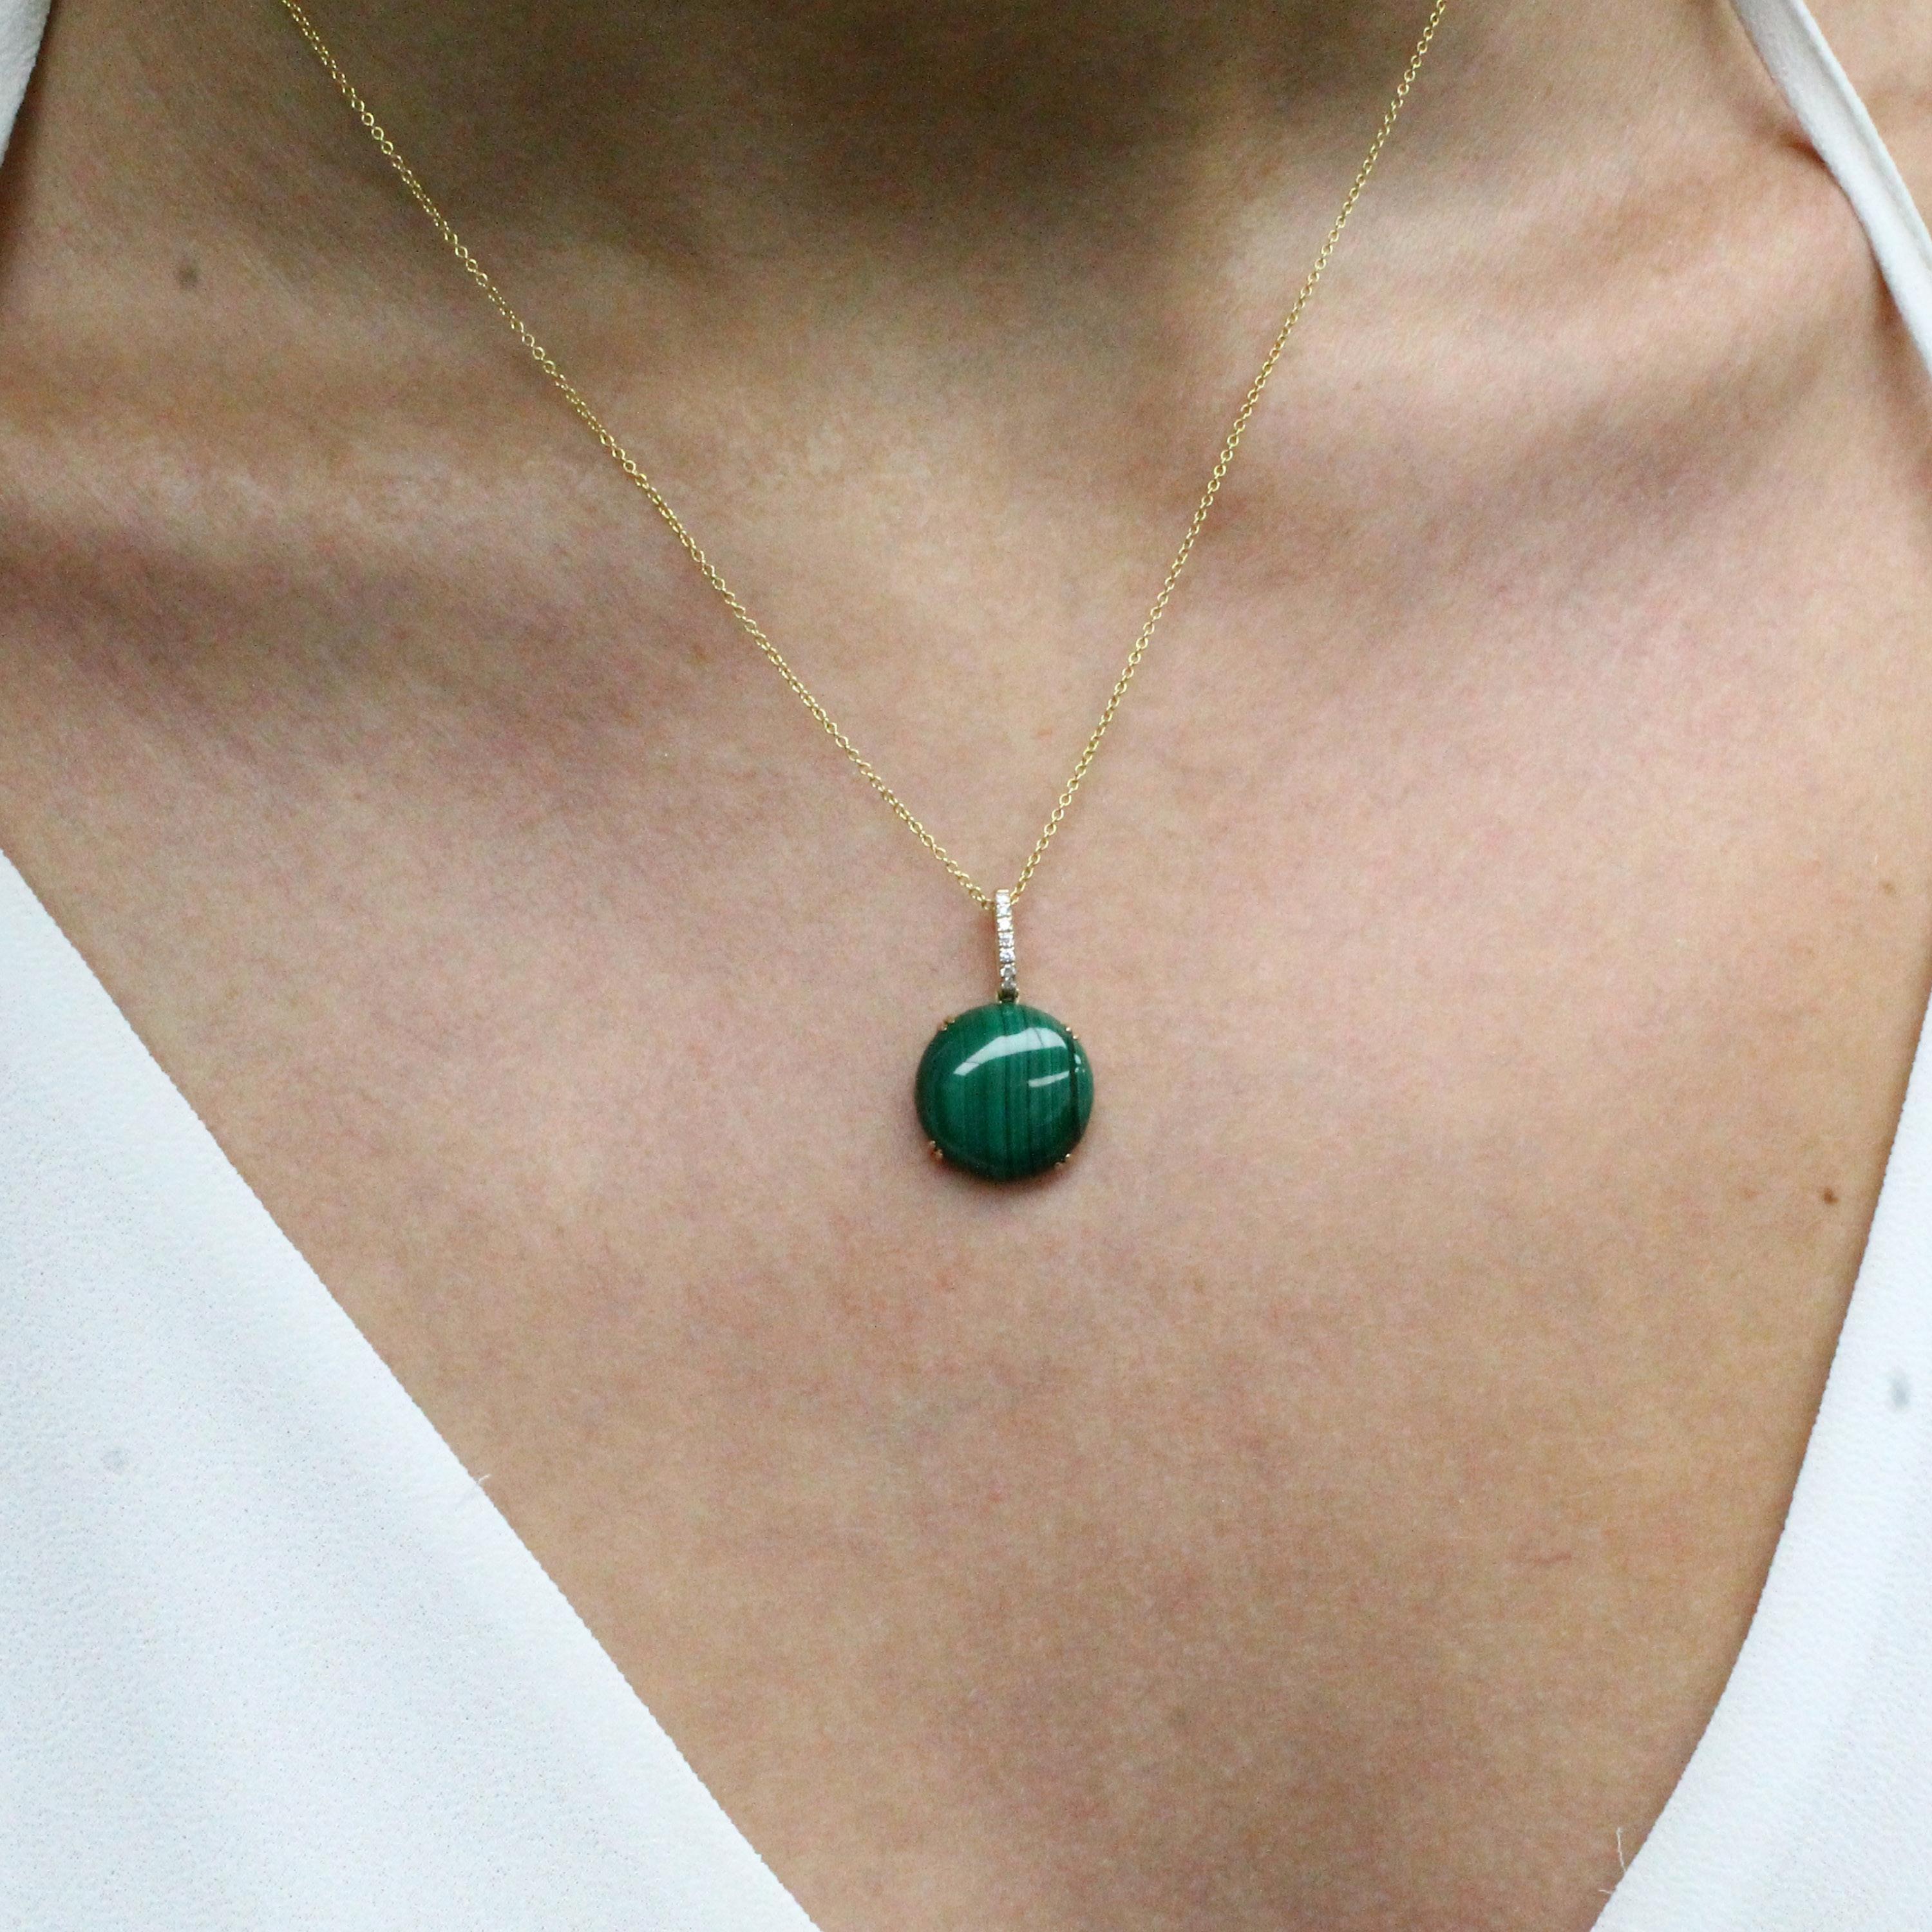 Verde Collection Necklace, with Round Cabochon-cut Malachite, a Diamond Bale, in 18K yellow gold. 18-inch 18K chain, with a 16-inch adjuster. Malachite is stone of balance and abundance, and often called 